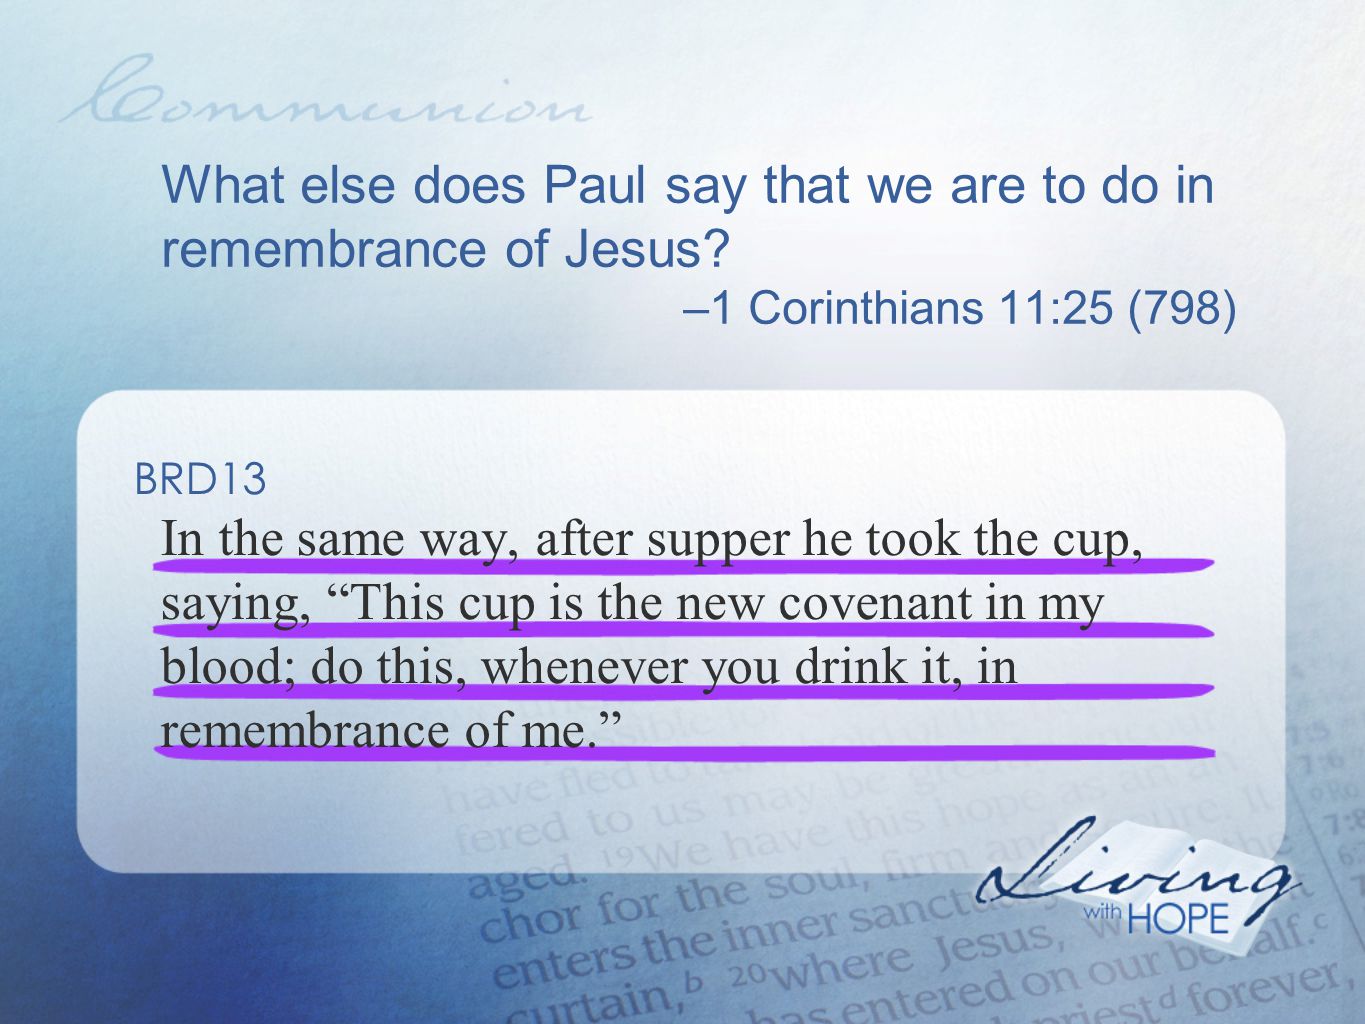 What else does Paul say that we are to do in remembrance of Jesus